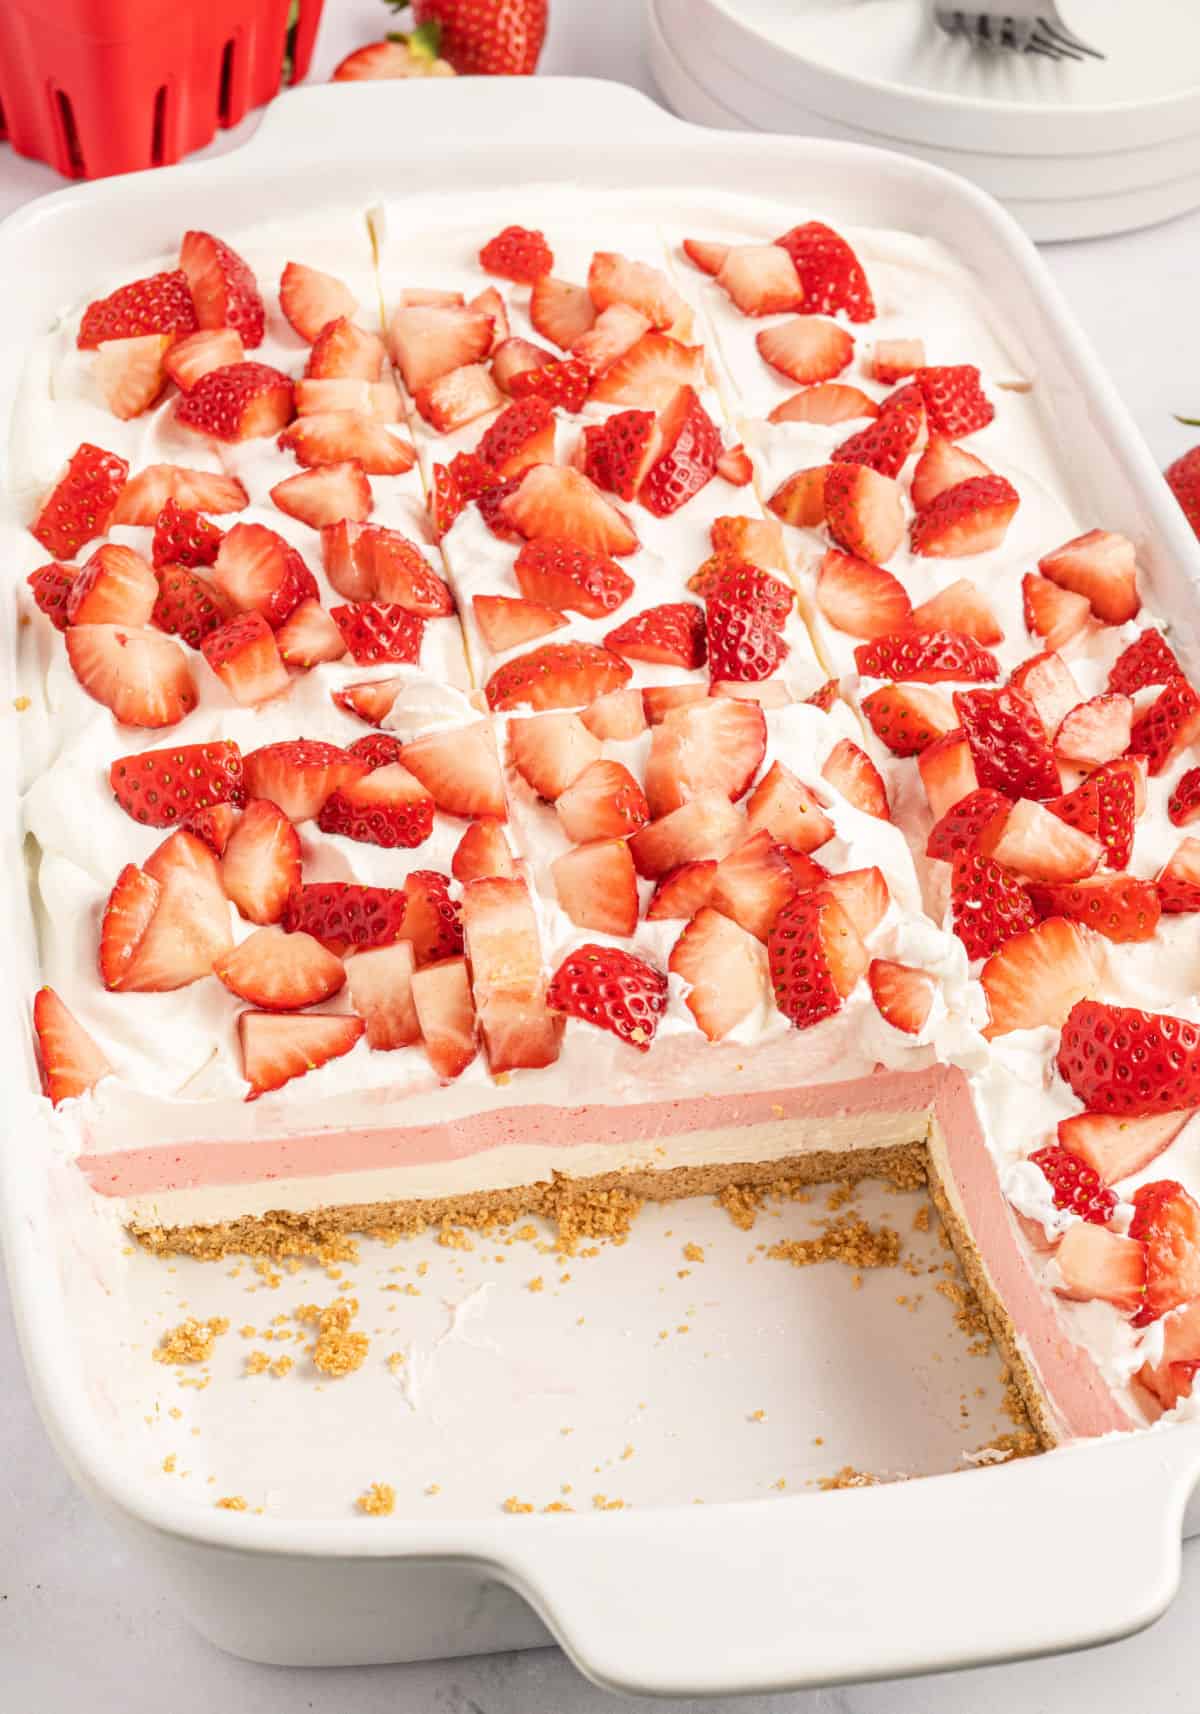 A white 13x9 baking dish with a layered strawberry dessert.